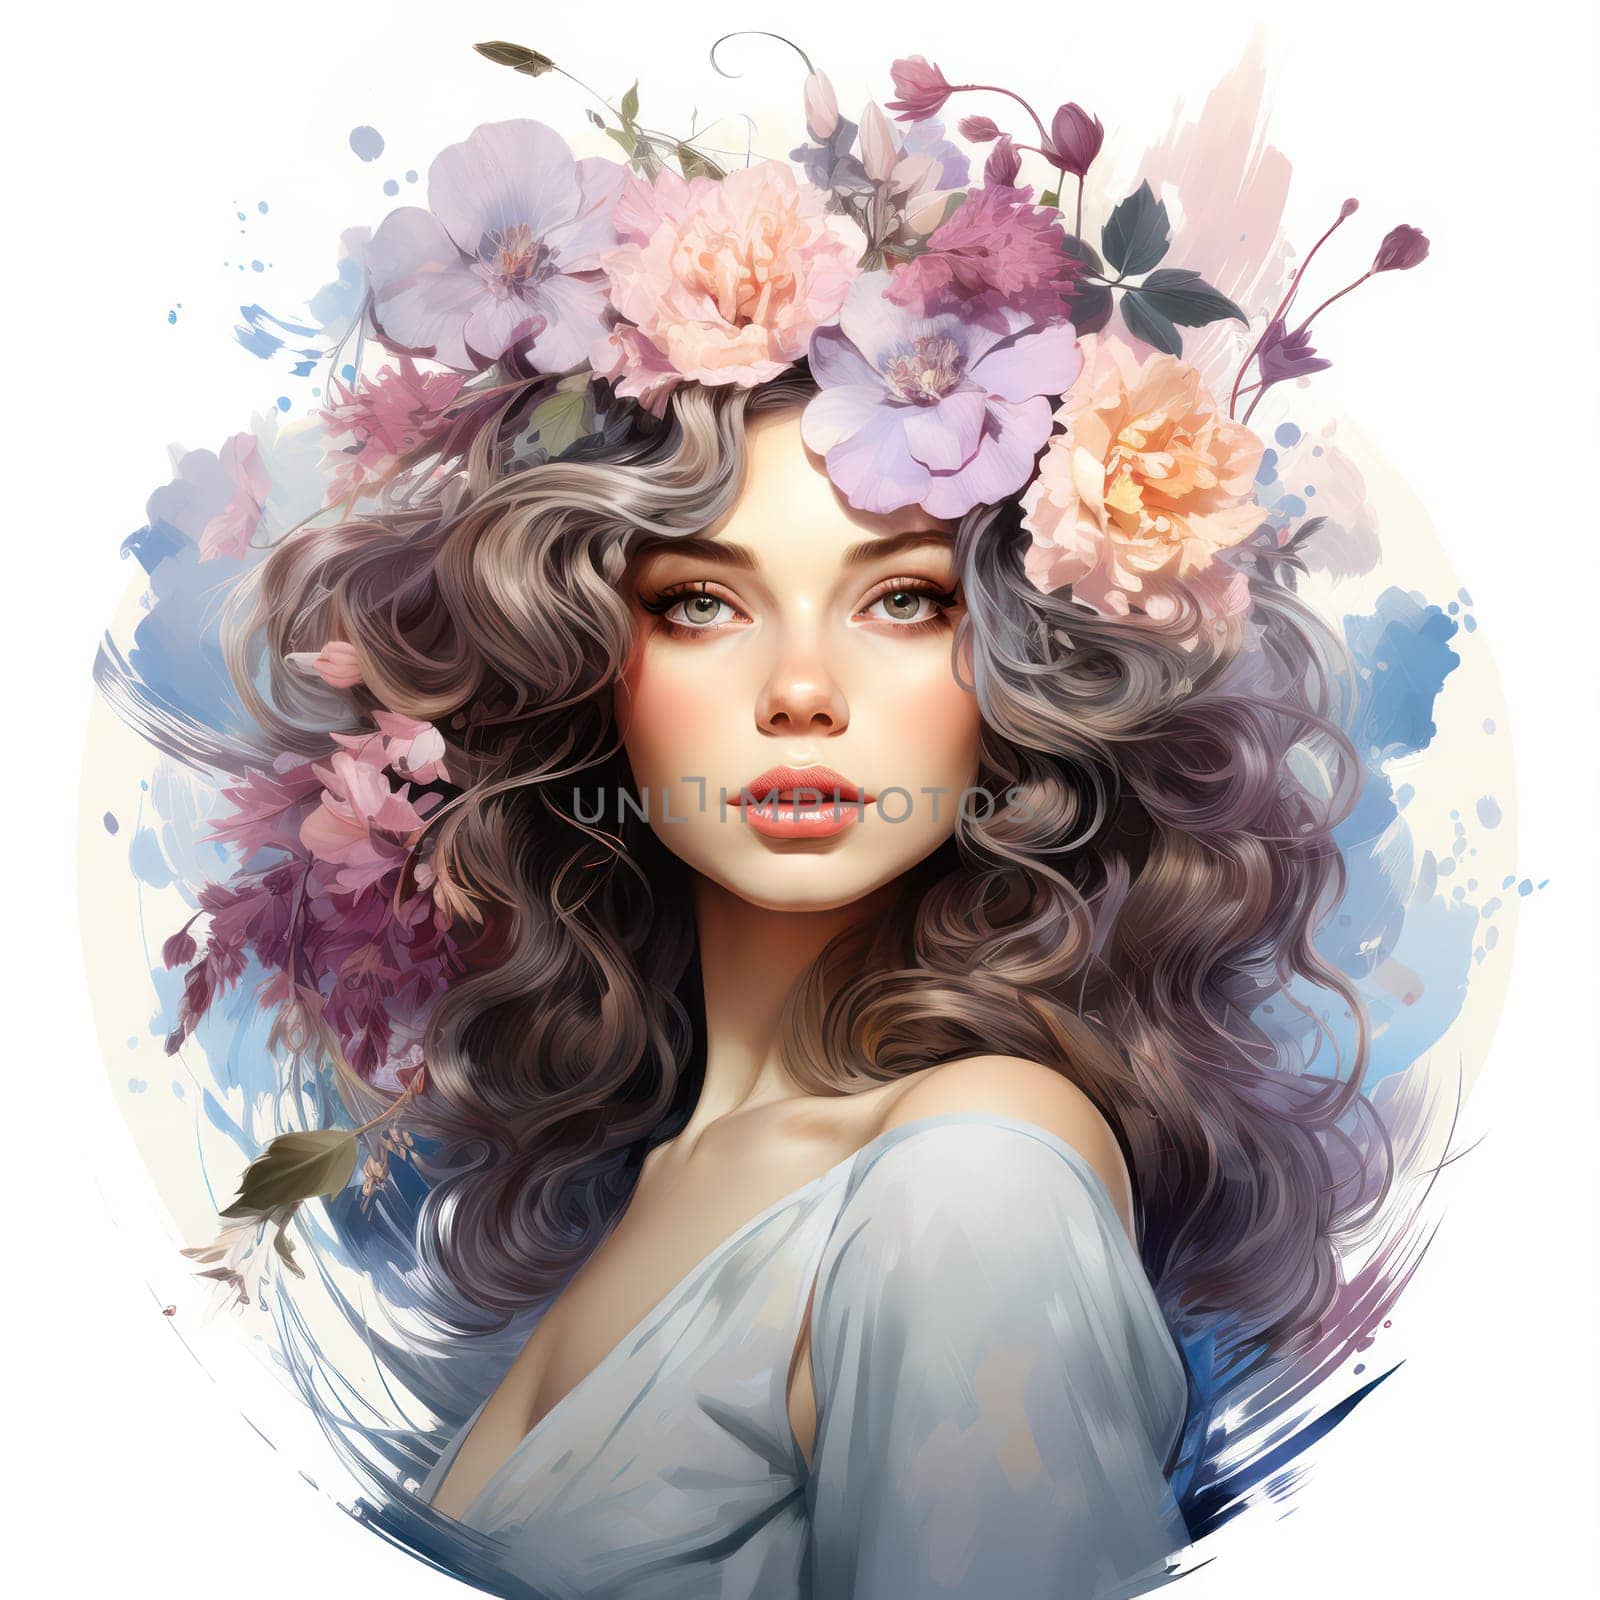 Floral Elegance: A Pretty Young Lady with a White Rose Wreath, Radiating Beauty and Glamour in a Spring Fantasy Portrait.